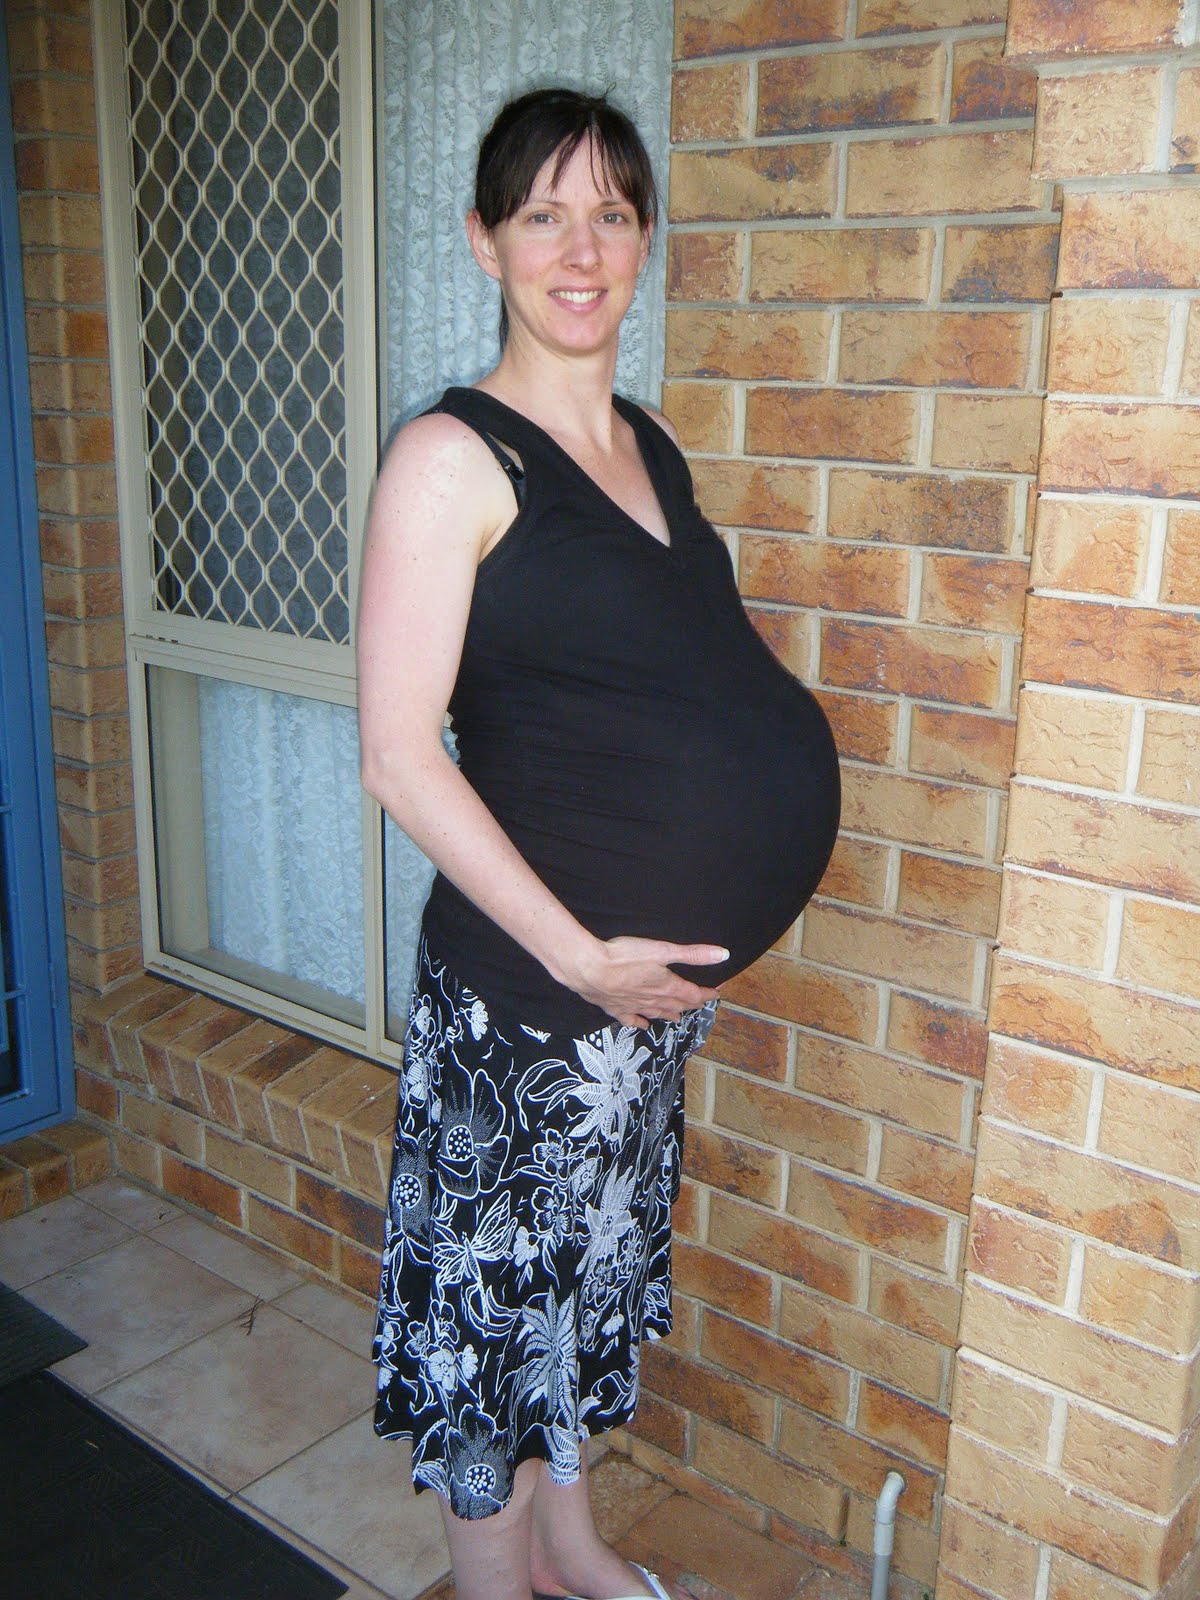 The Toowoomba Dunlop Family: The Twin Pregnancy